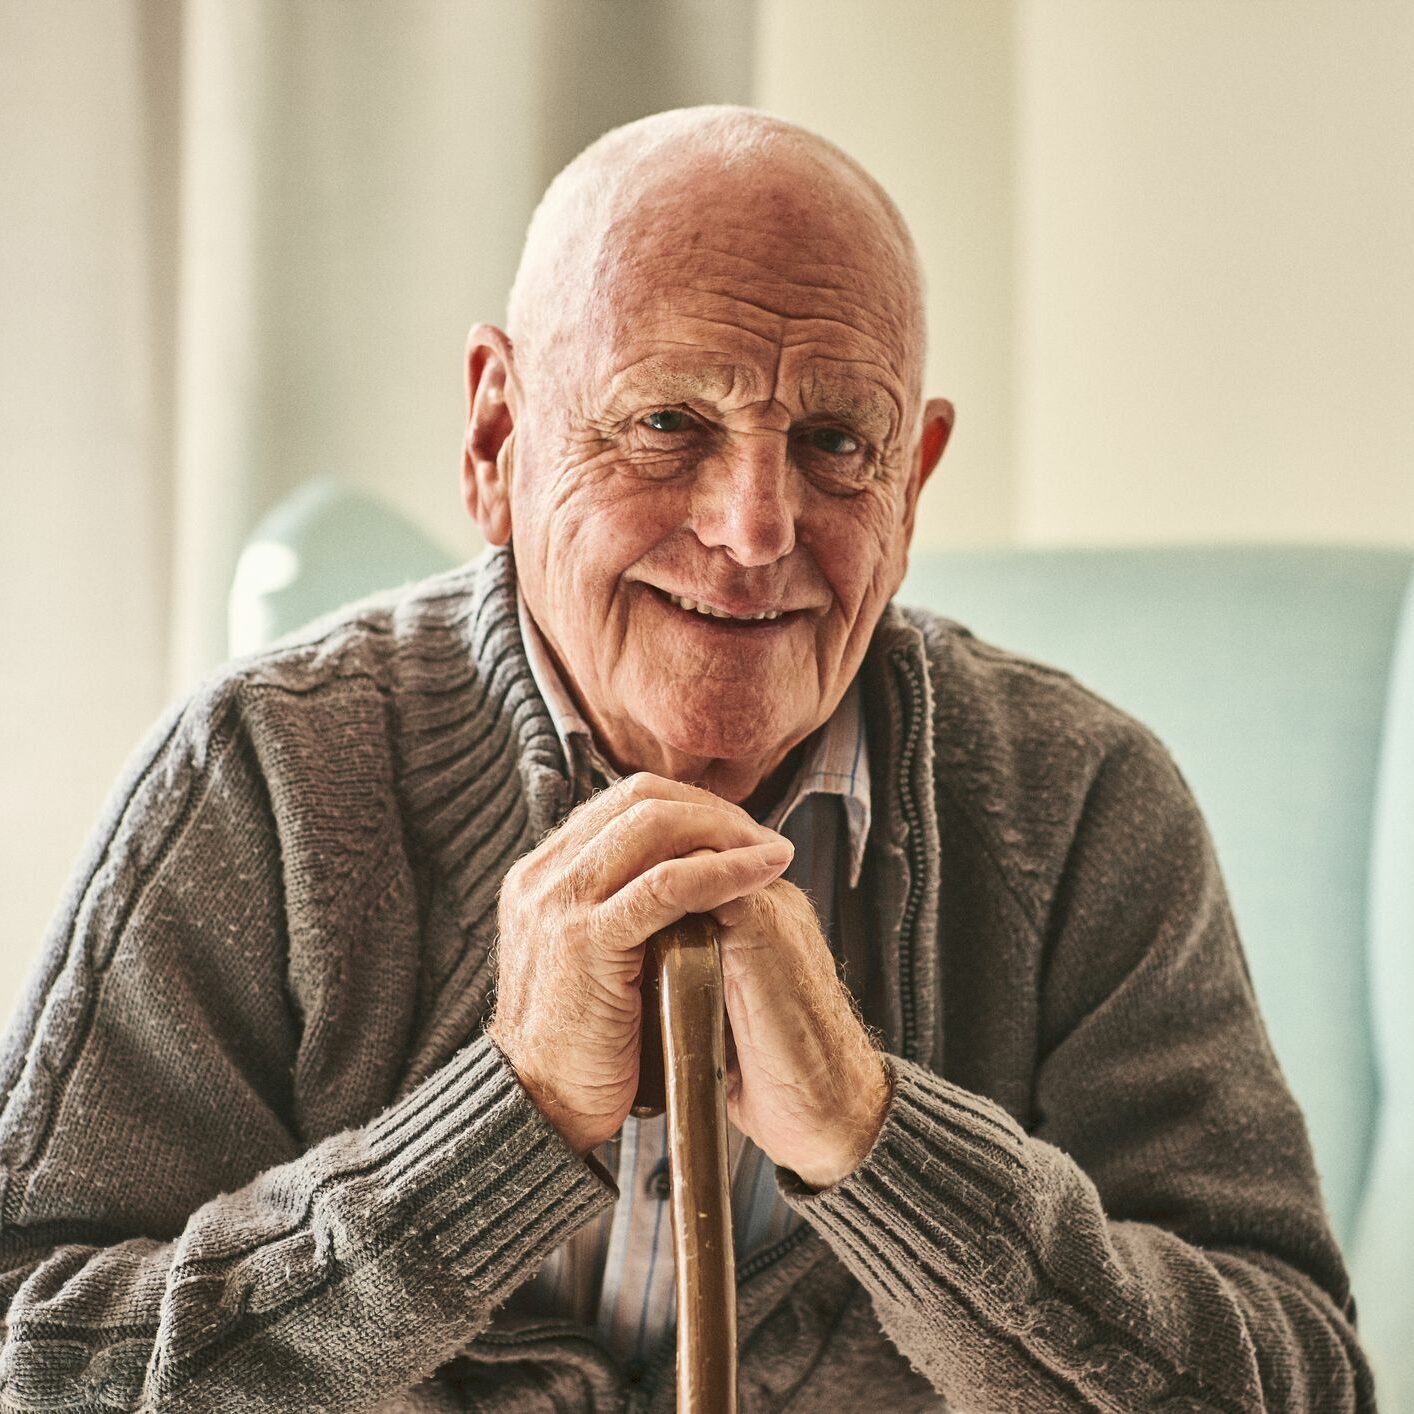 Older man smiling with his chin resting on his hands which are perched on a cane.